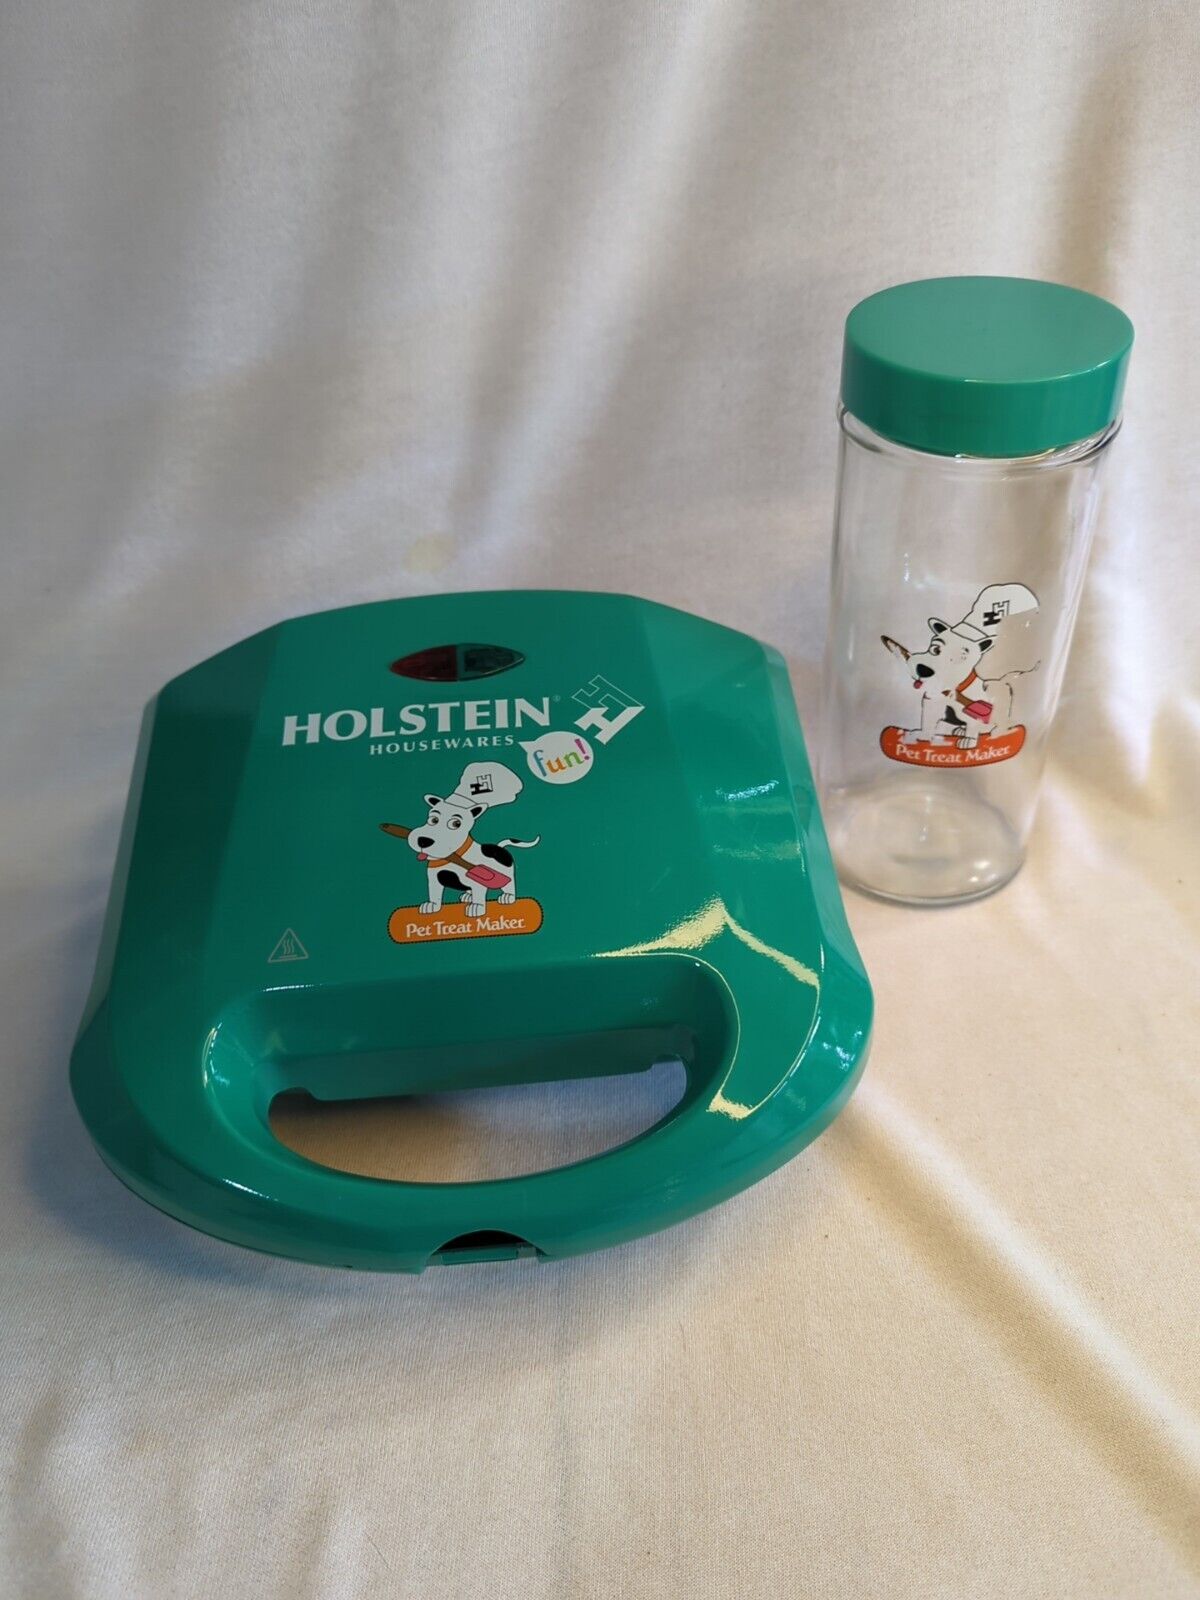 Holstein Housewares Pet Treat Maker Dog Biscuit Maker Green And Container